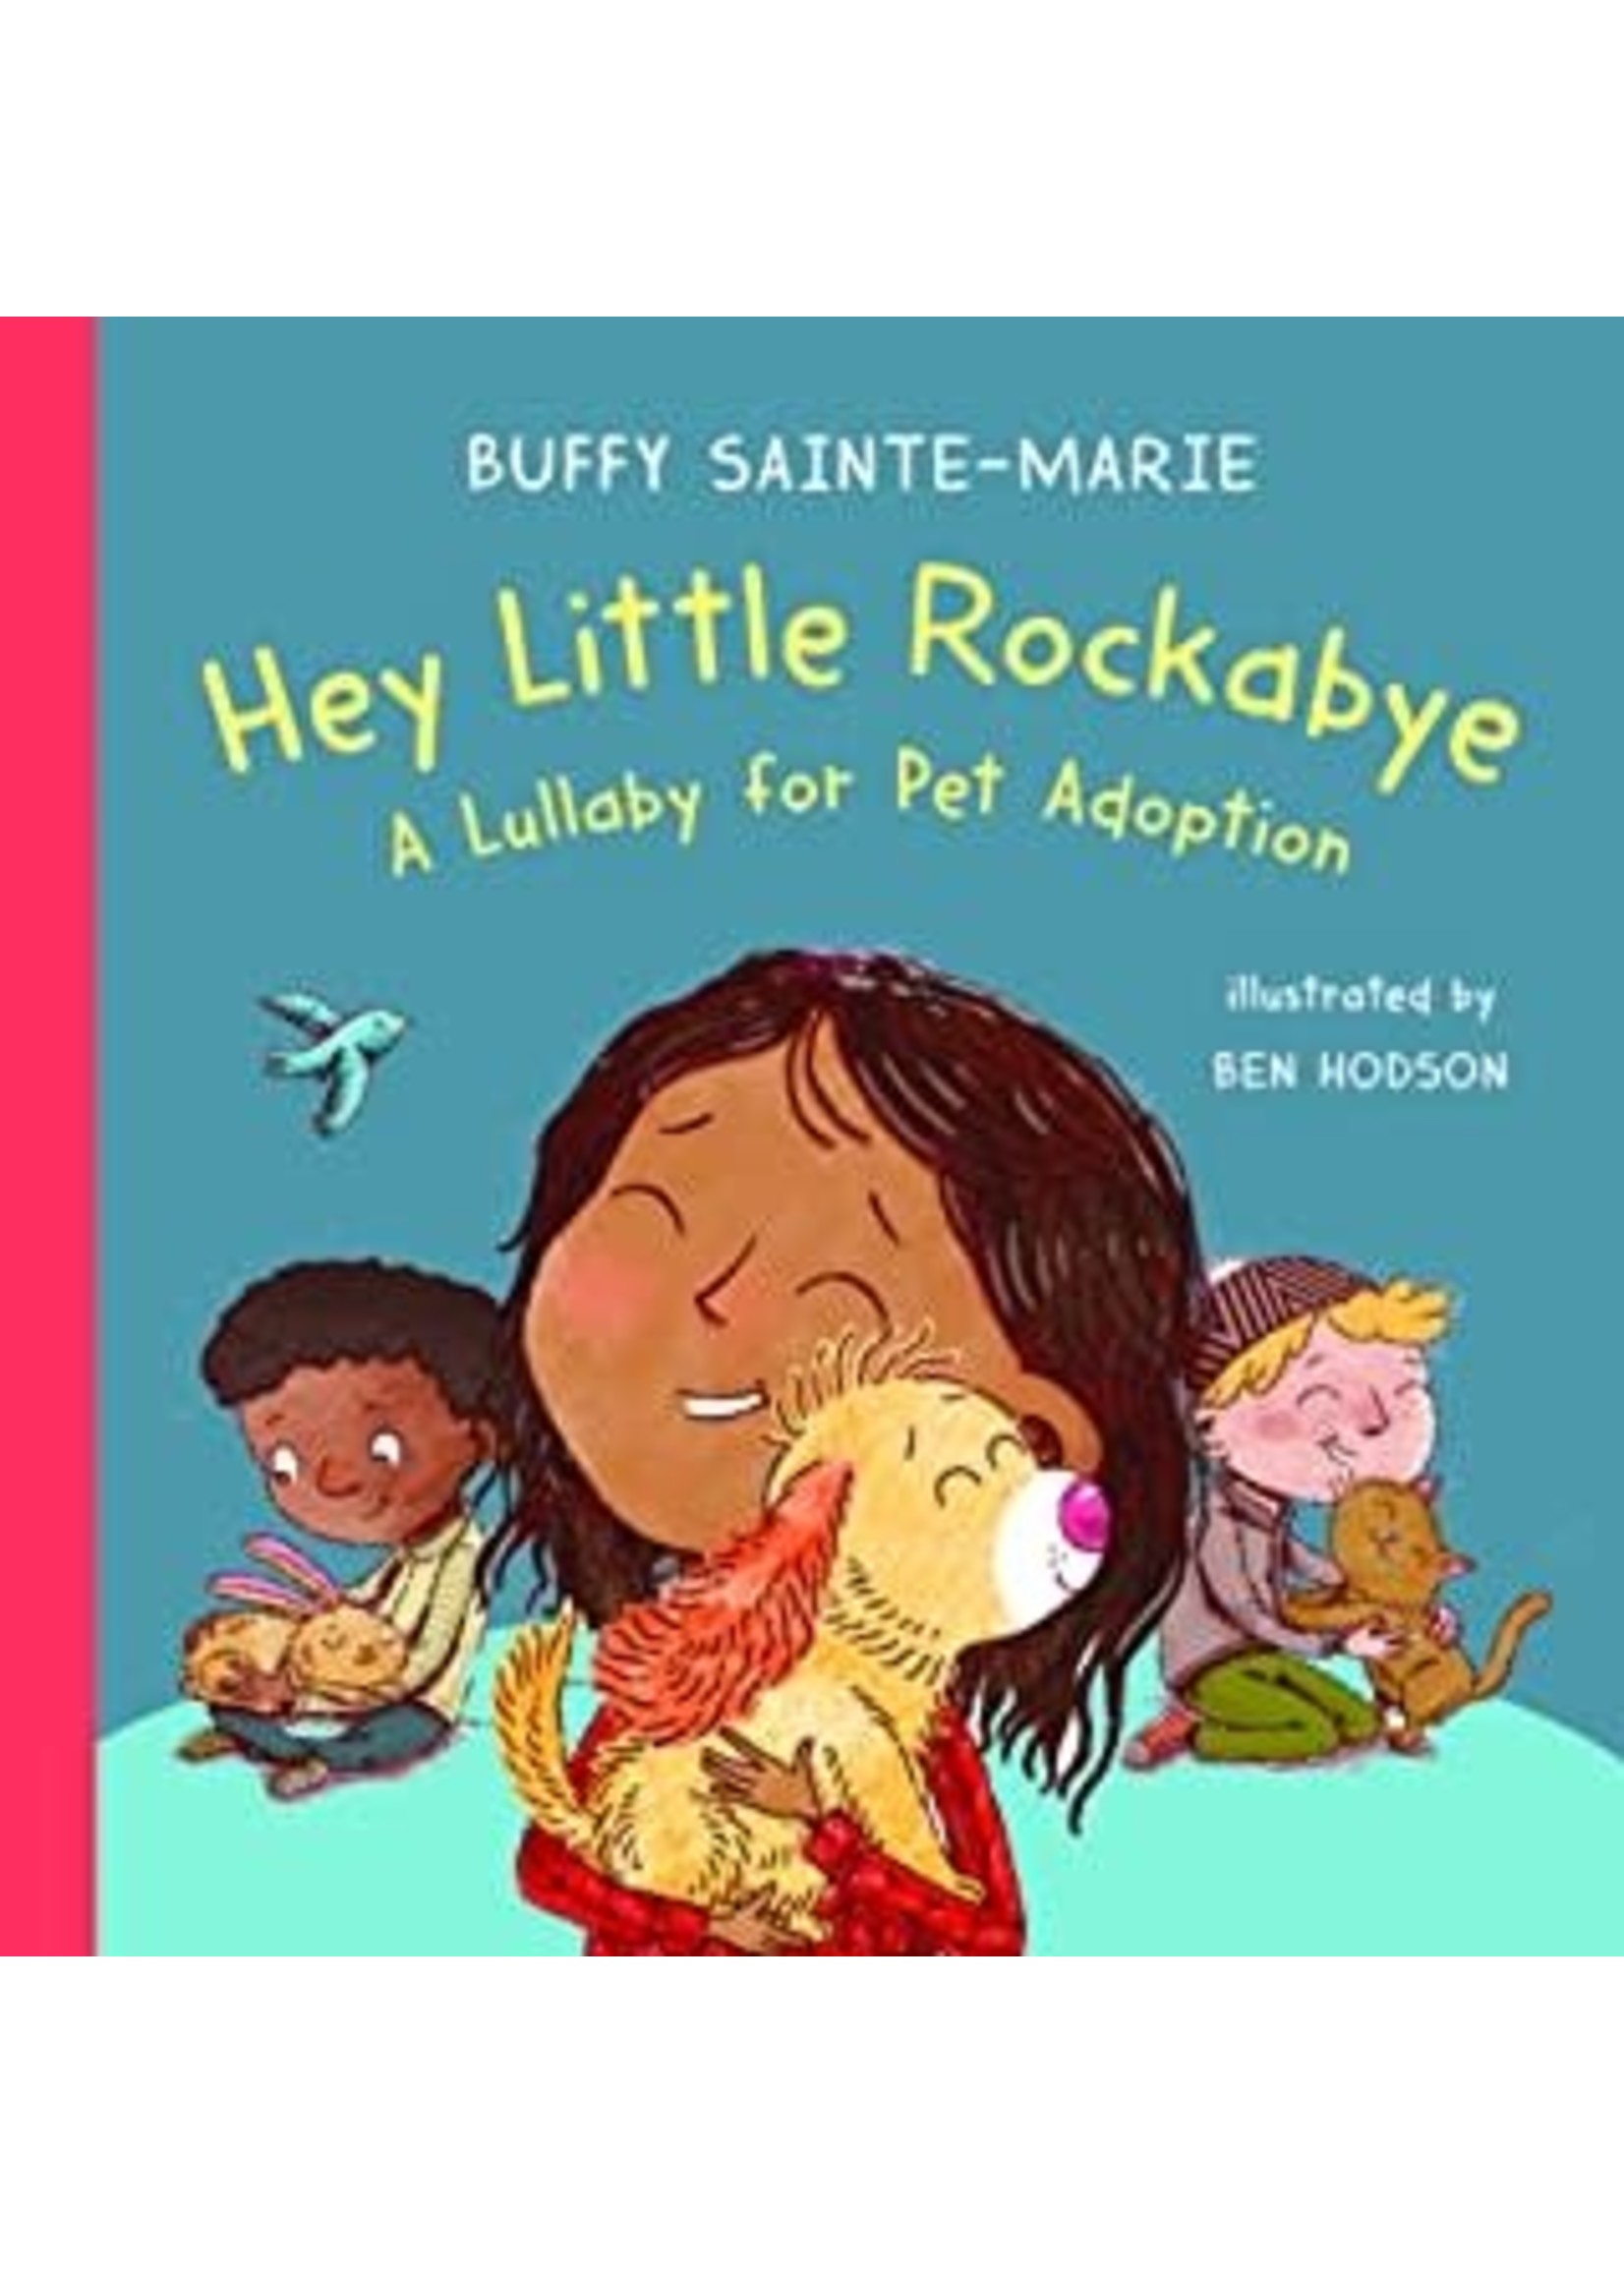 Hey Little Rockabye: A Lullaby for Pet Adoption by Buffy Sainte-Marie